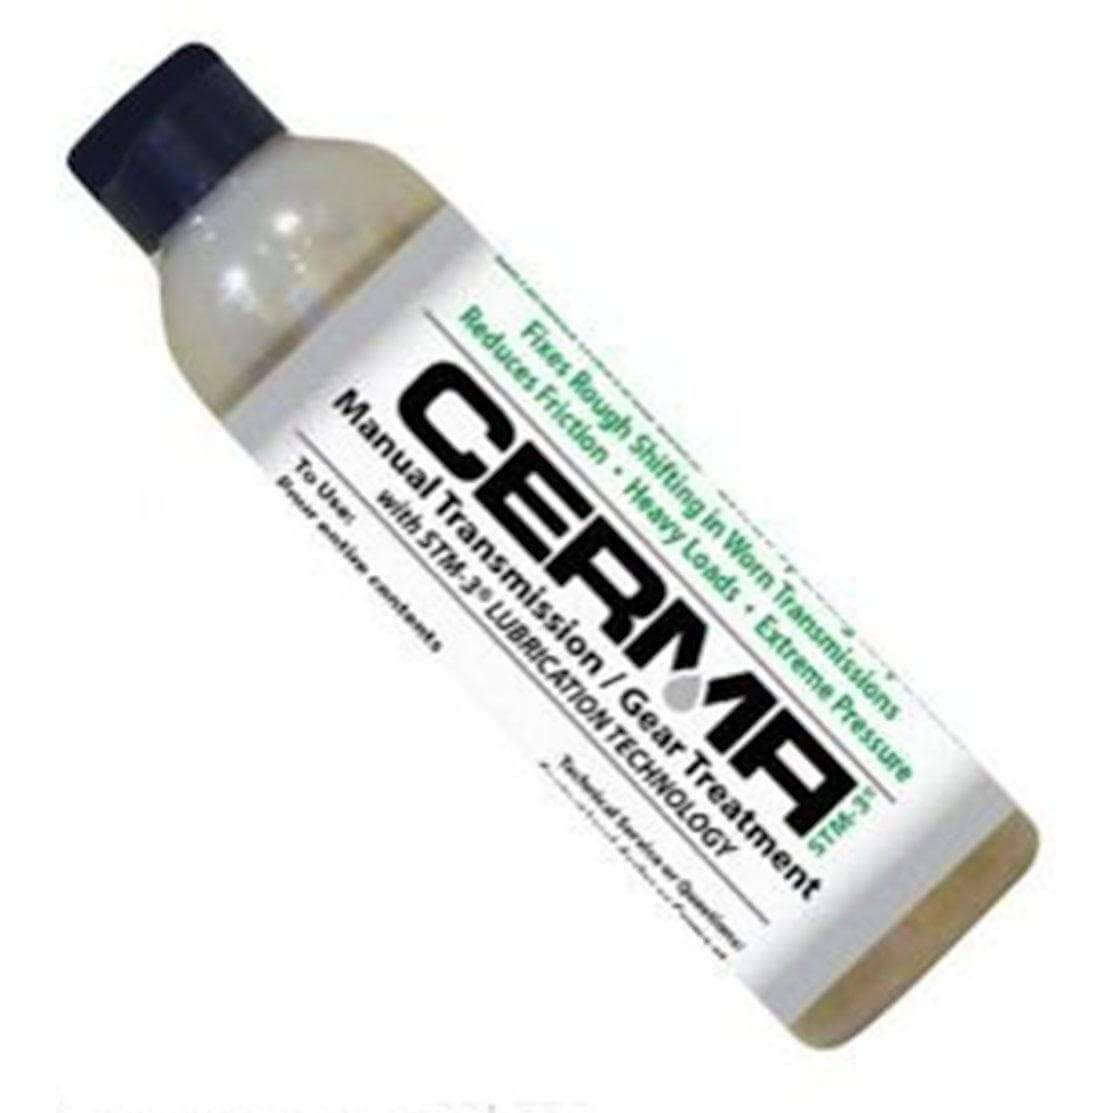 Cerma For Manual Transmission Treatment at $193 only from cermatreatment.com